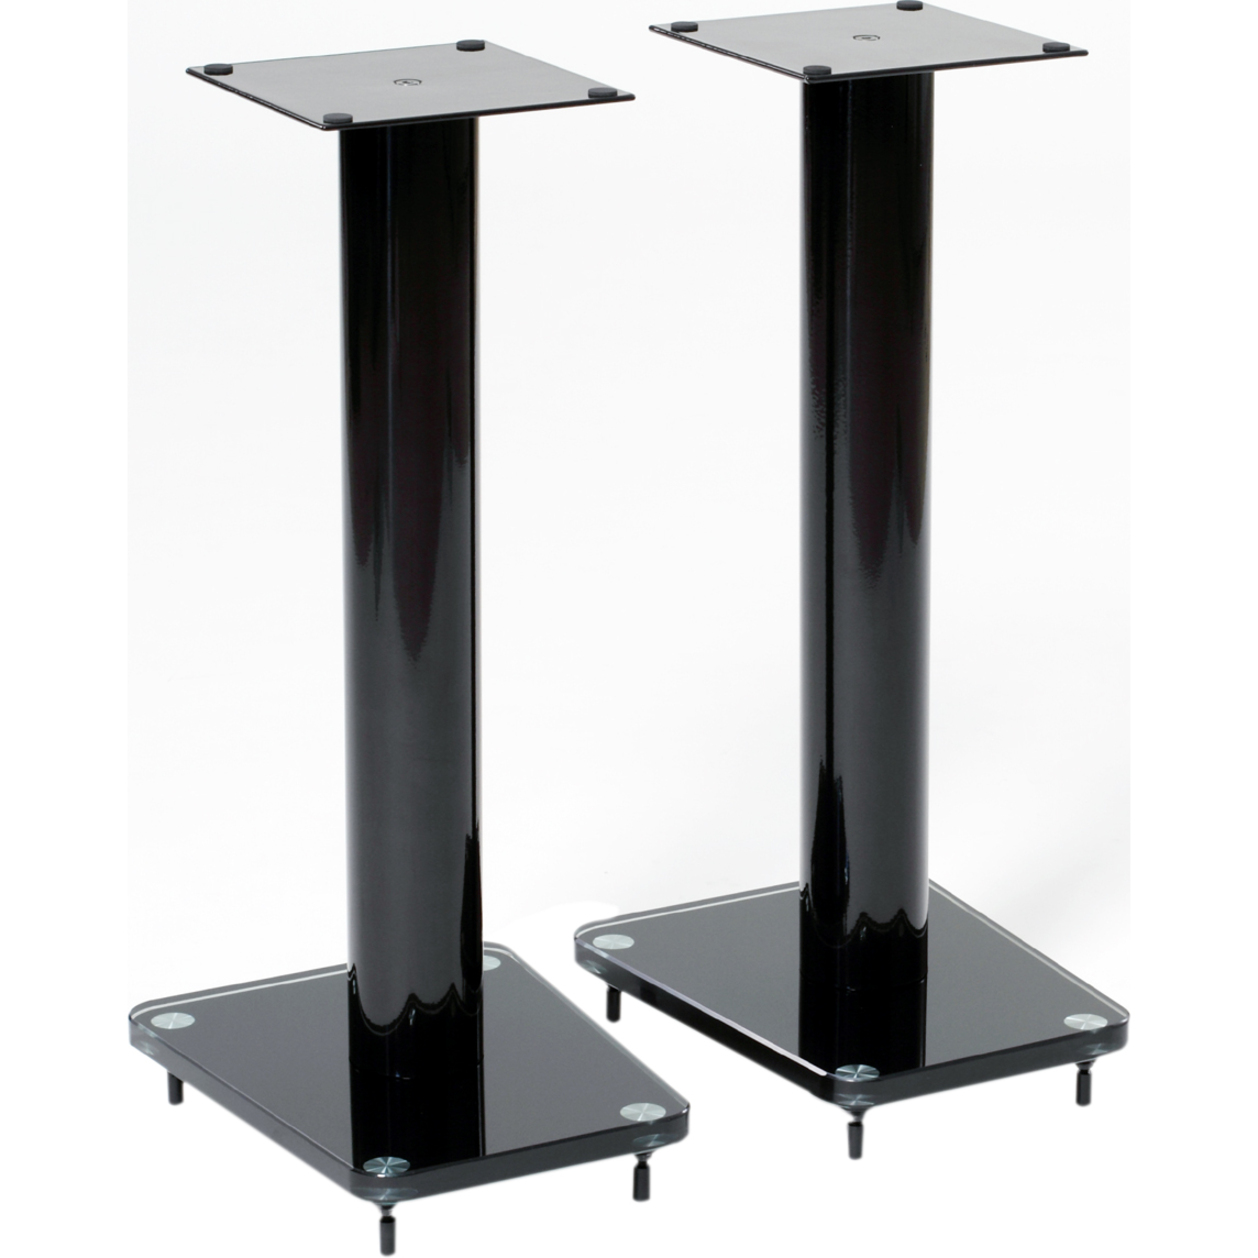 24" Tempered glass & metal speaker stand in gloss black finish. Sold as pair - image 3 of 3